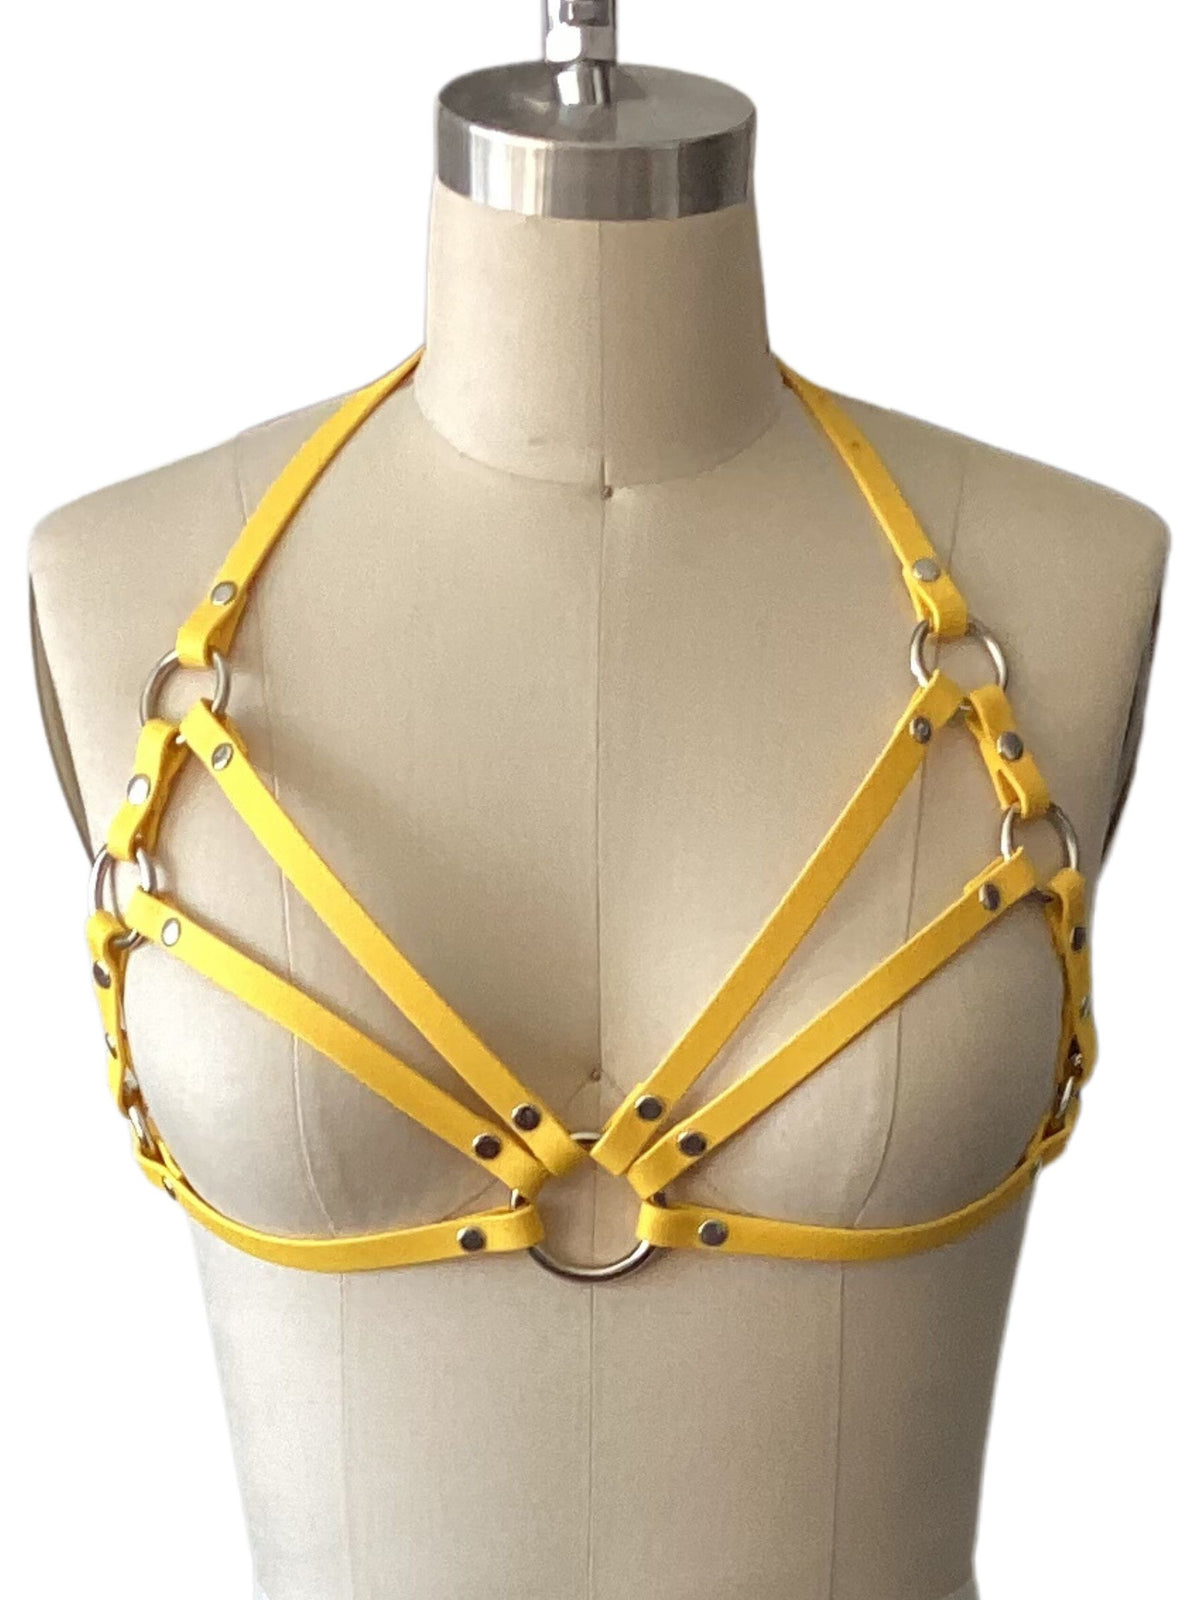 a photo of a yellow caged chest harness for women on a dress form on a white background